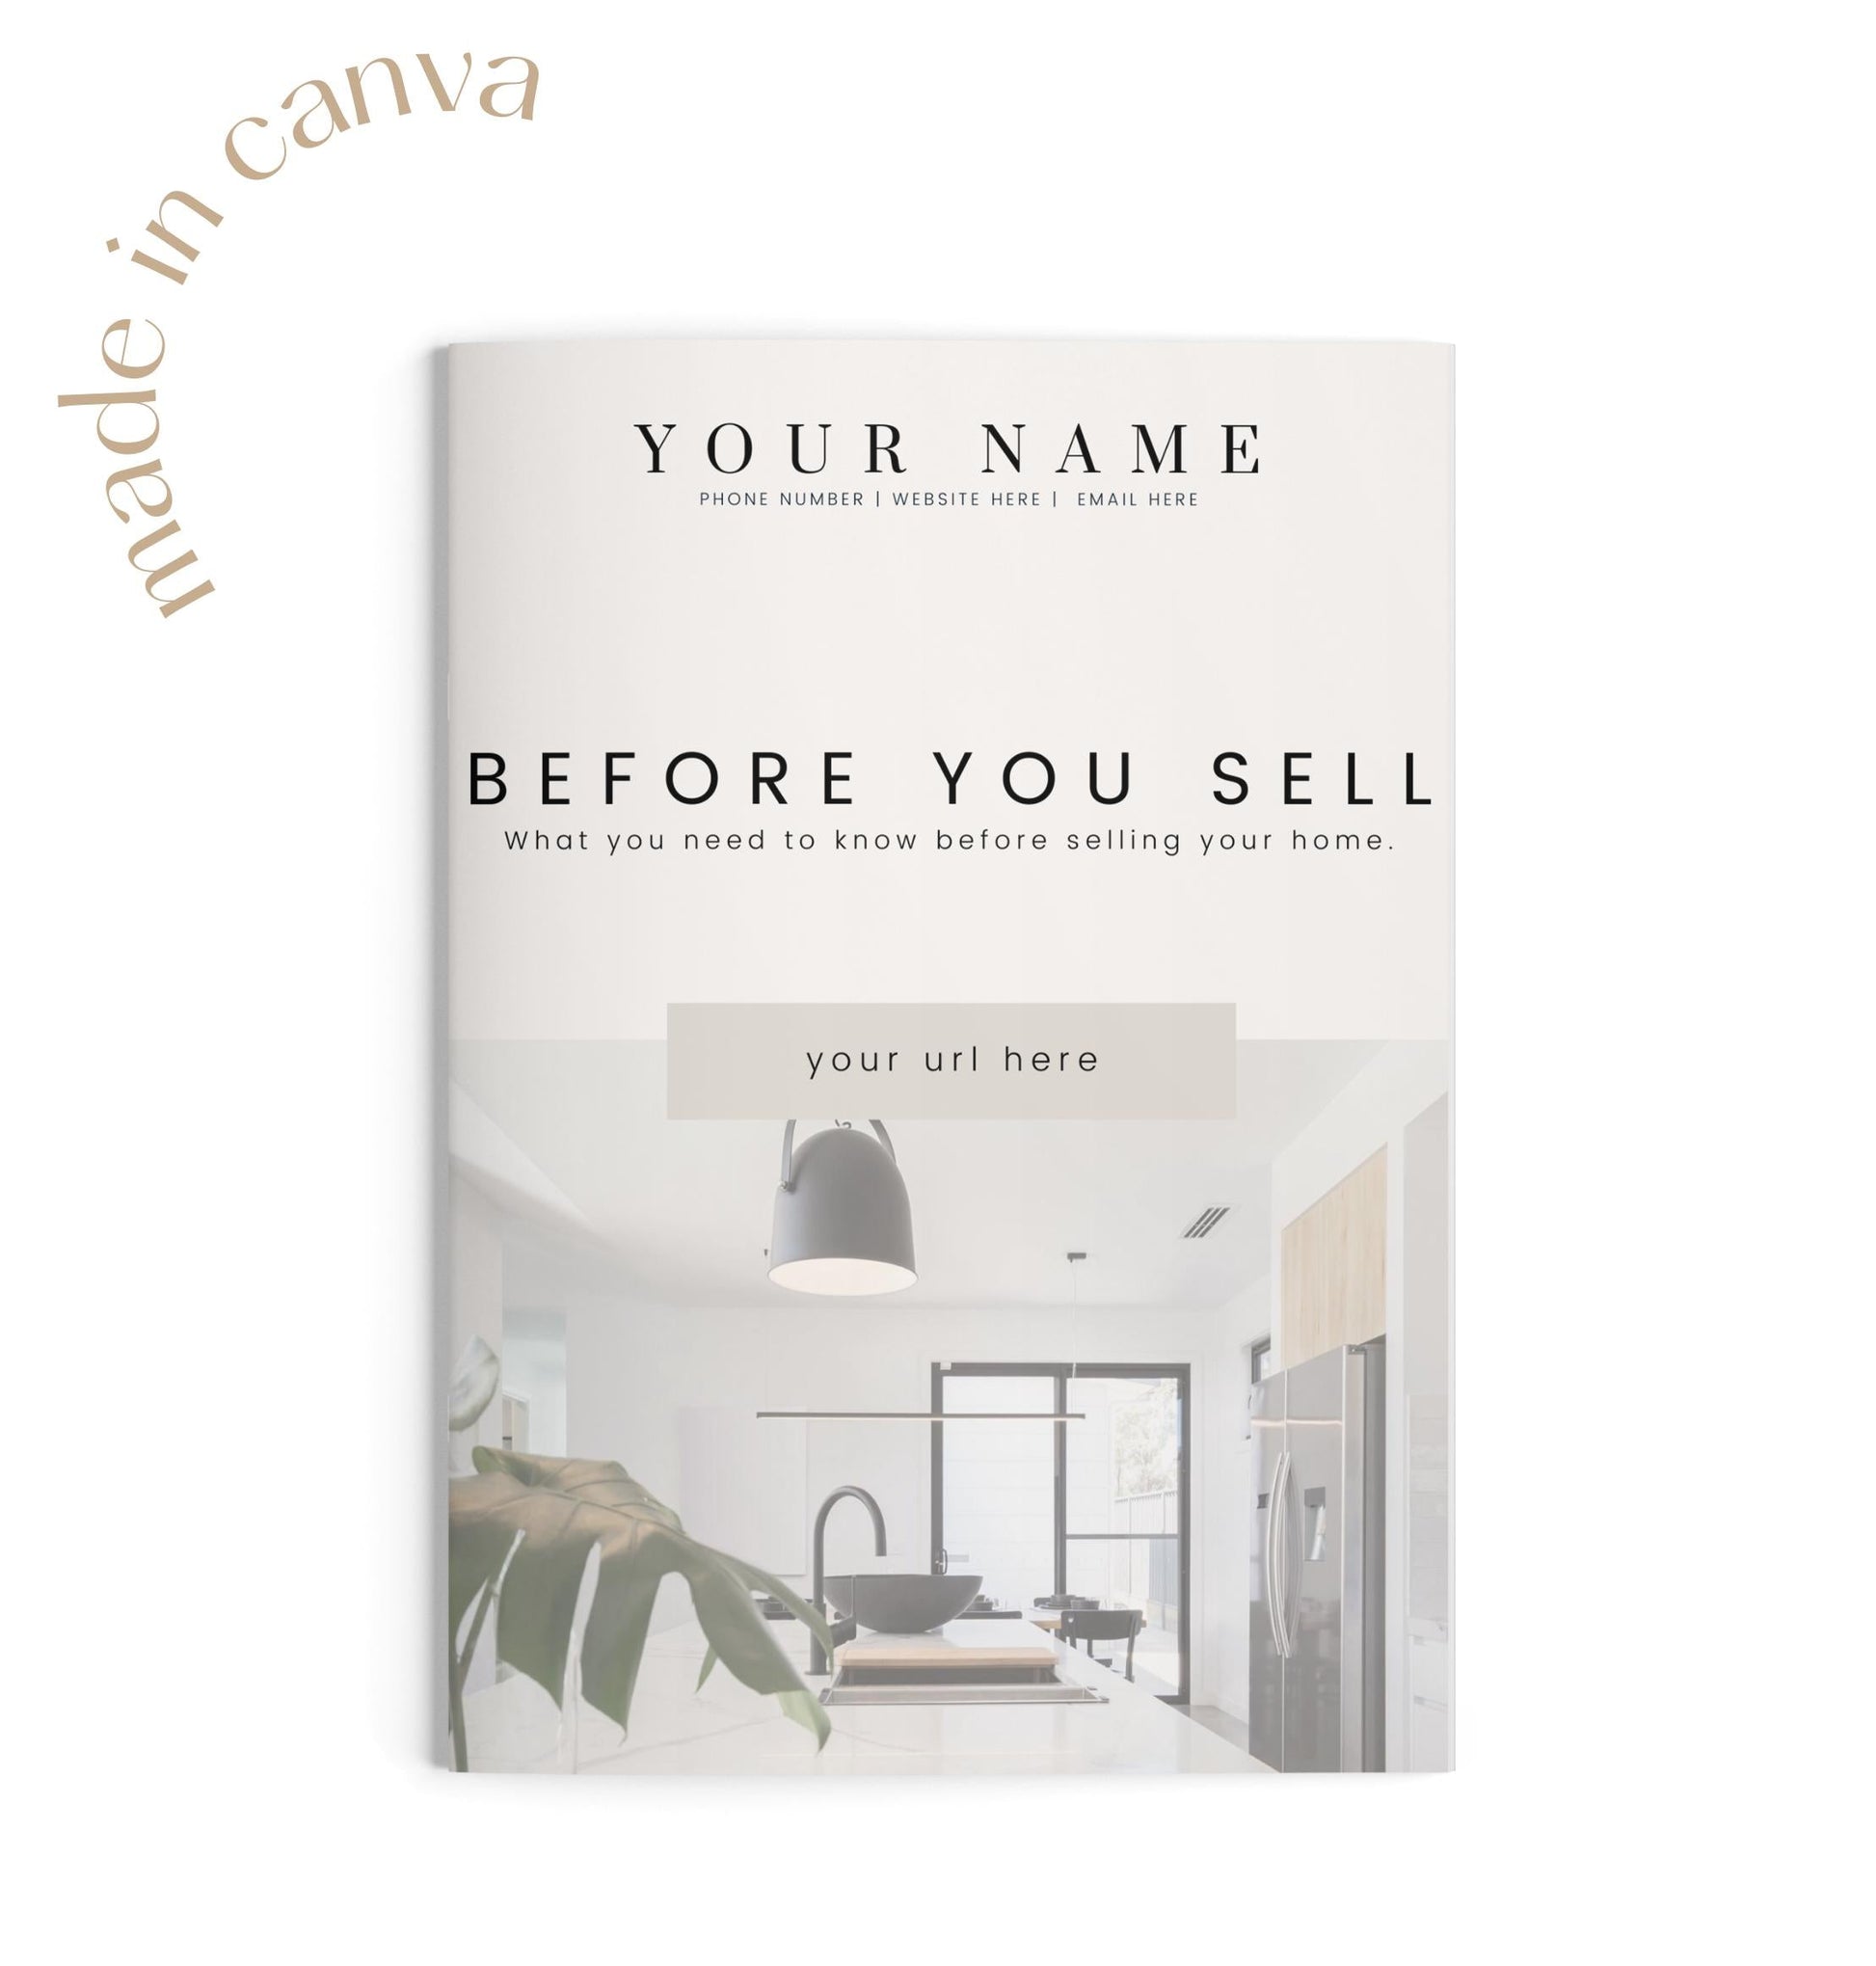 Before you Sell: What you need to know before selling your home - Pre-Listing Real Estate Presentation Instant Download for Real Estate Agents, Realtors - Instant Download - Made in Canva